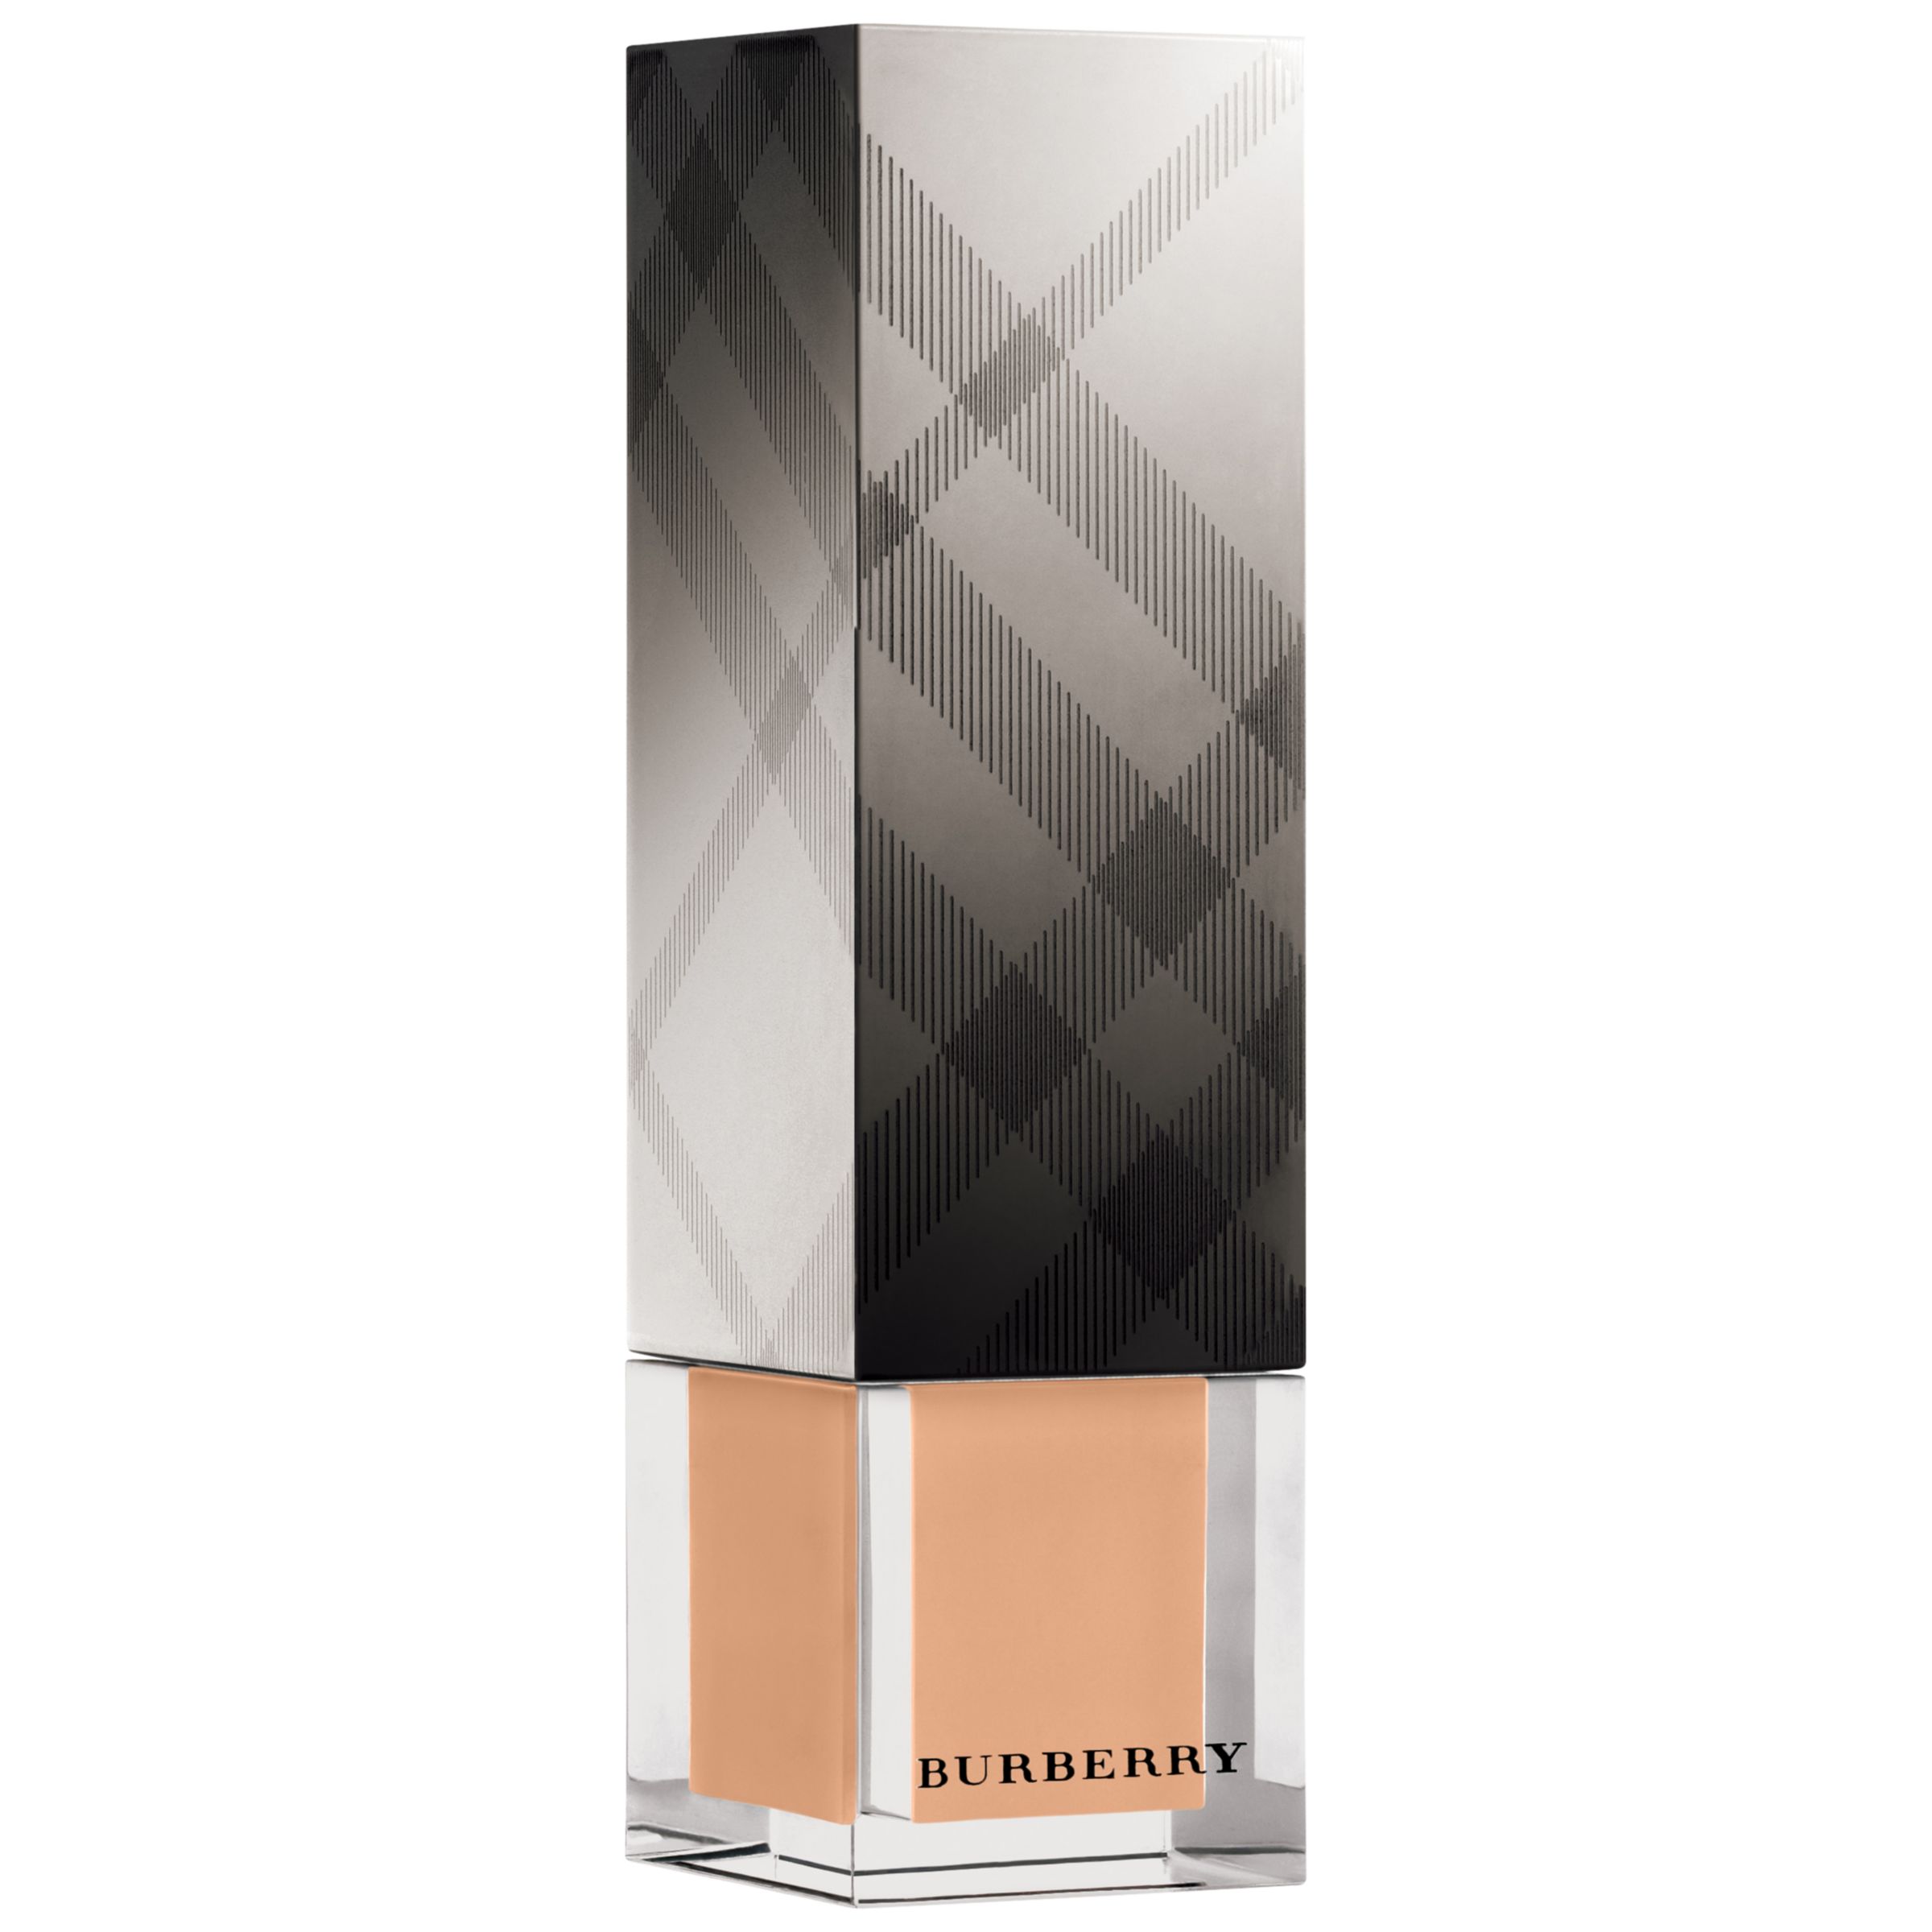 shop for Burberry Beauty Fresh Glow Foundation - SPF 15 PA at Shopo